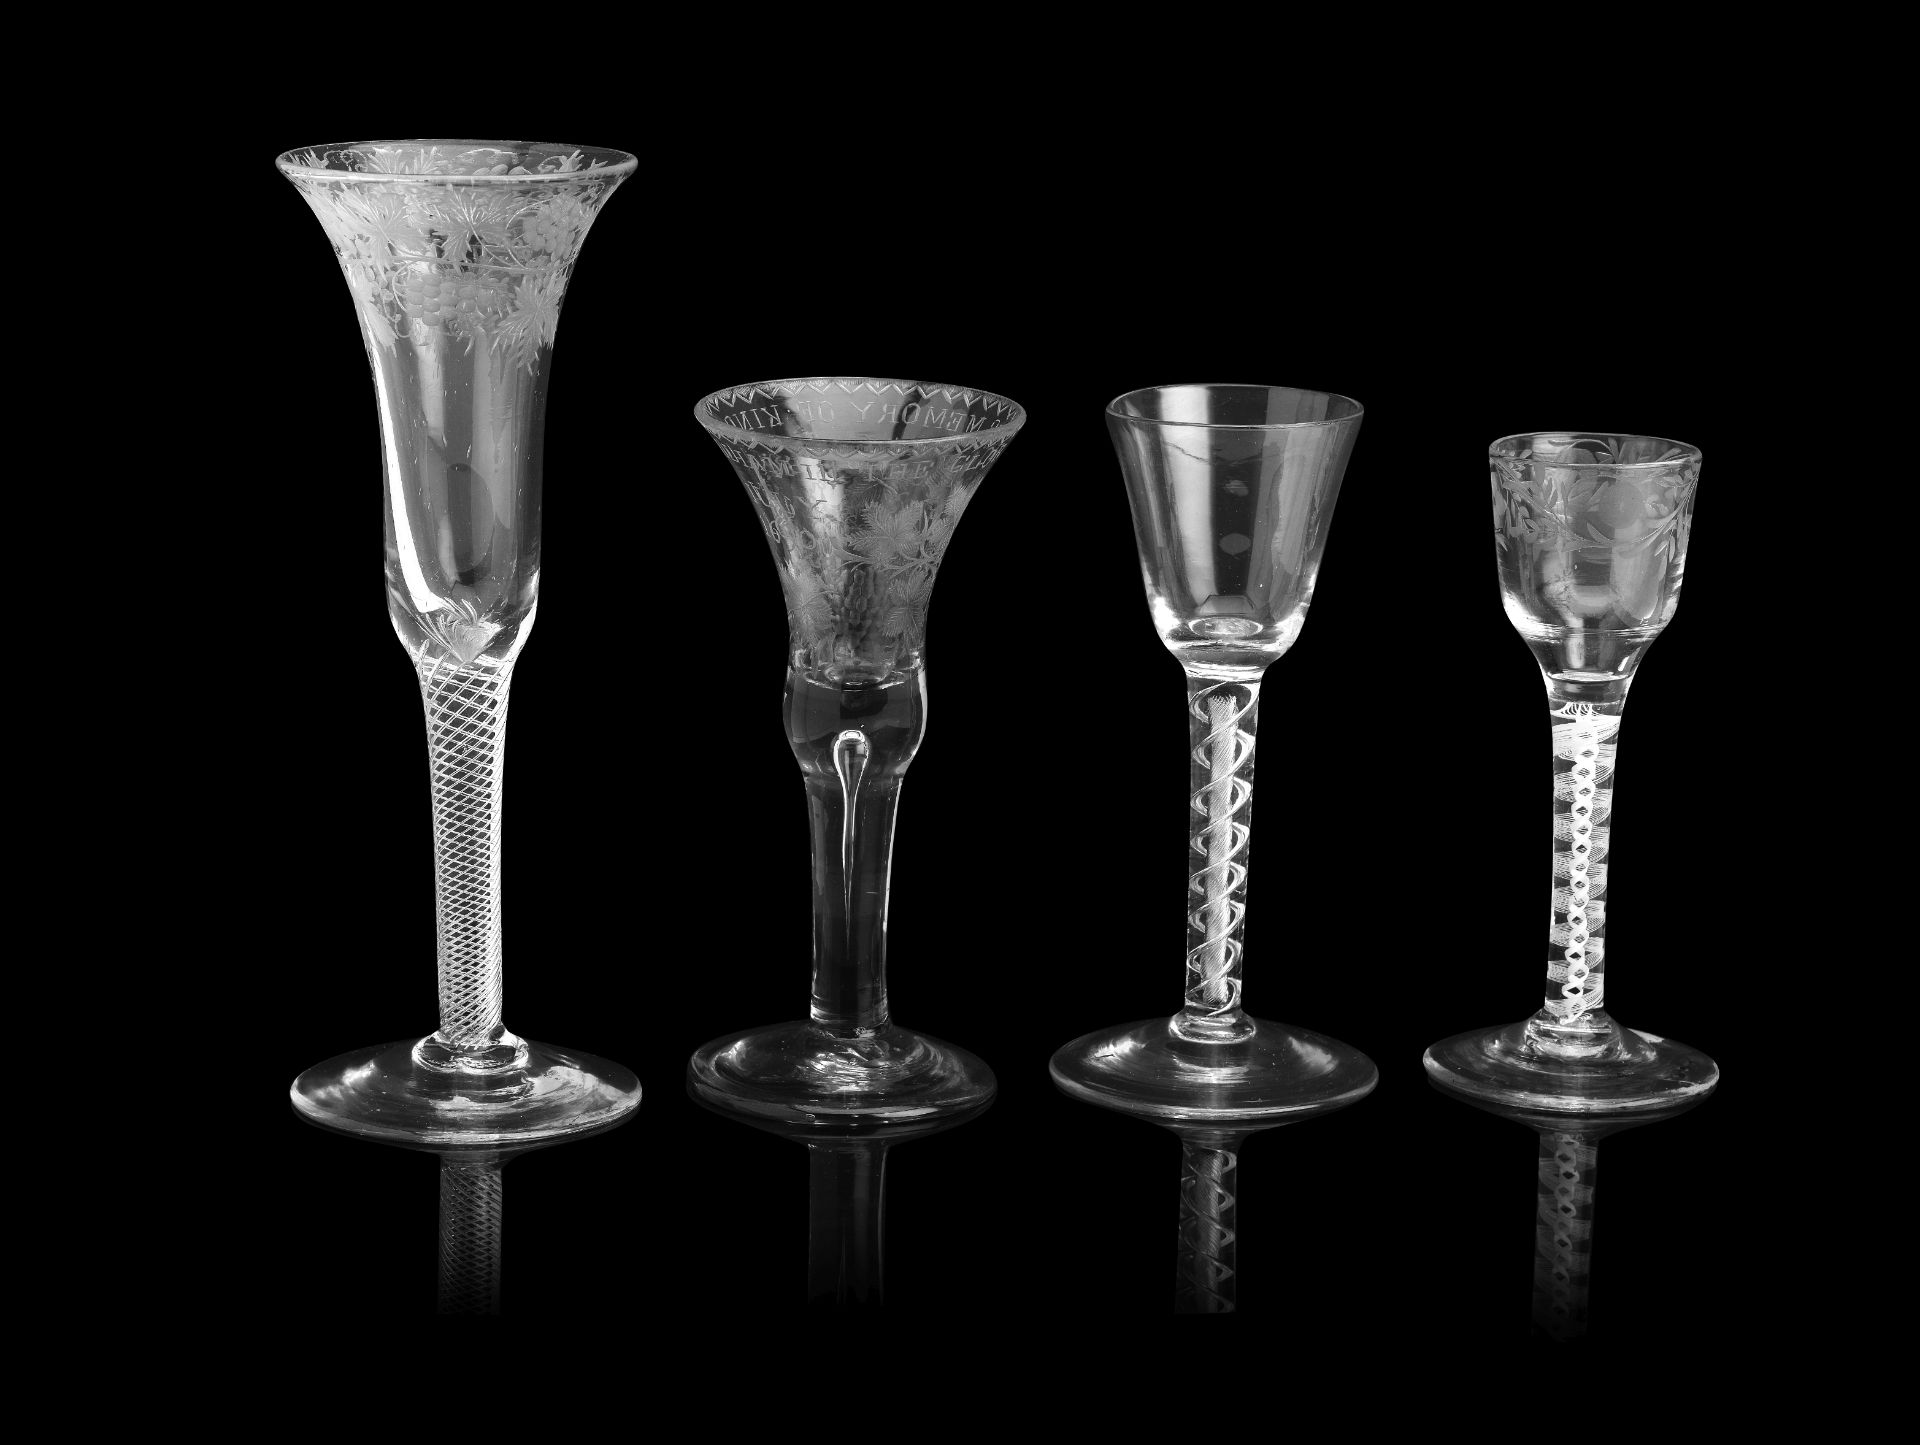 A Williamite engraved wine glass and three glasses with twist stems, circa 1740-65